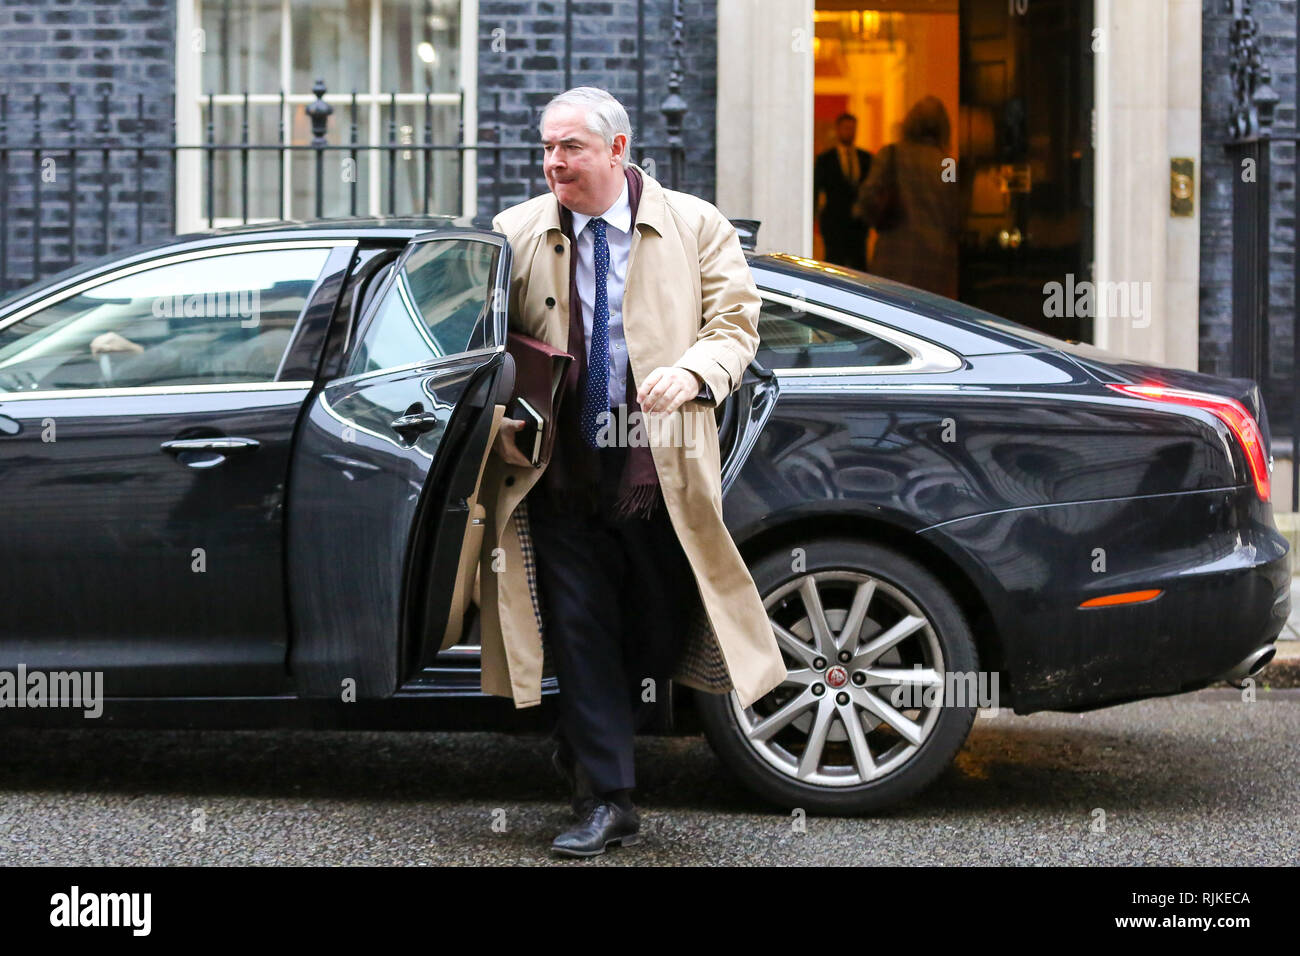 Geoffrey Cox - Attorney General seen arriving at the Downing Street to attend the weekly Cabinet Meeting. Stock Photo